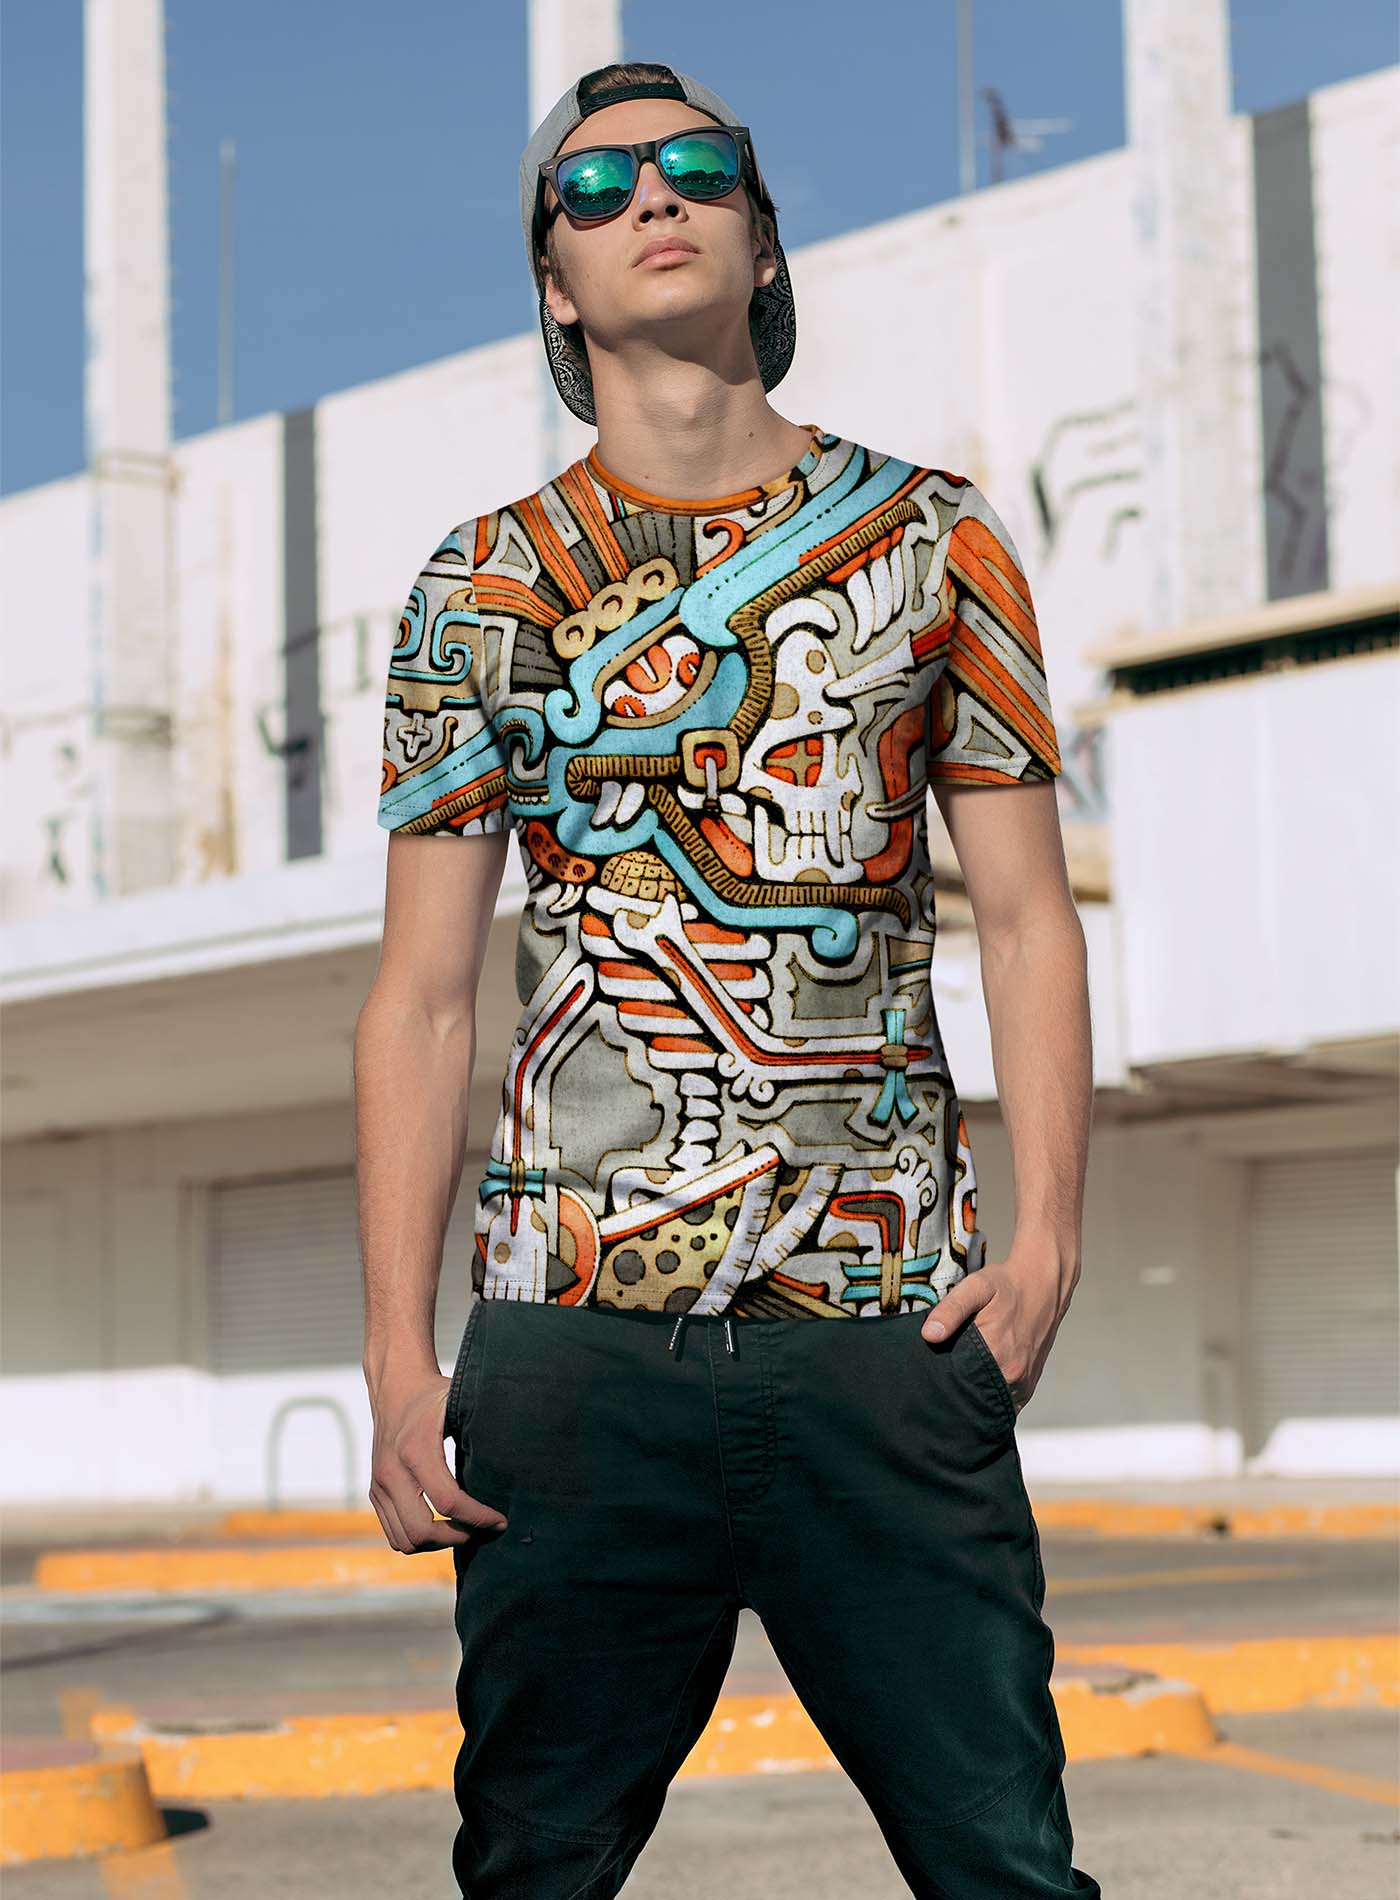 Man modeling an All over dye sublimation t-shirt featuring an illustration of the Aztec god Tezcatlipoca by G.M. Meave.